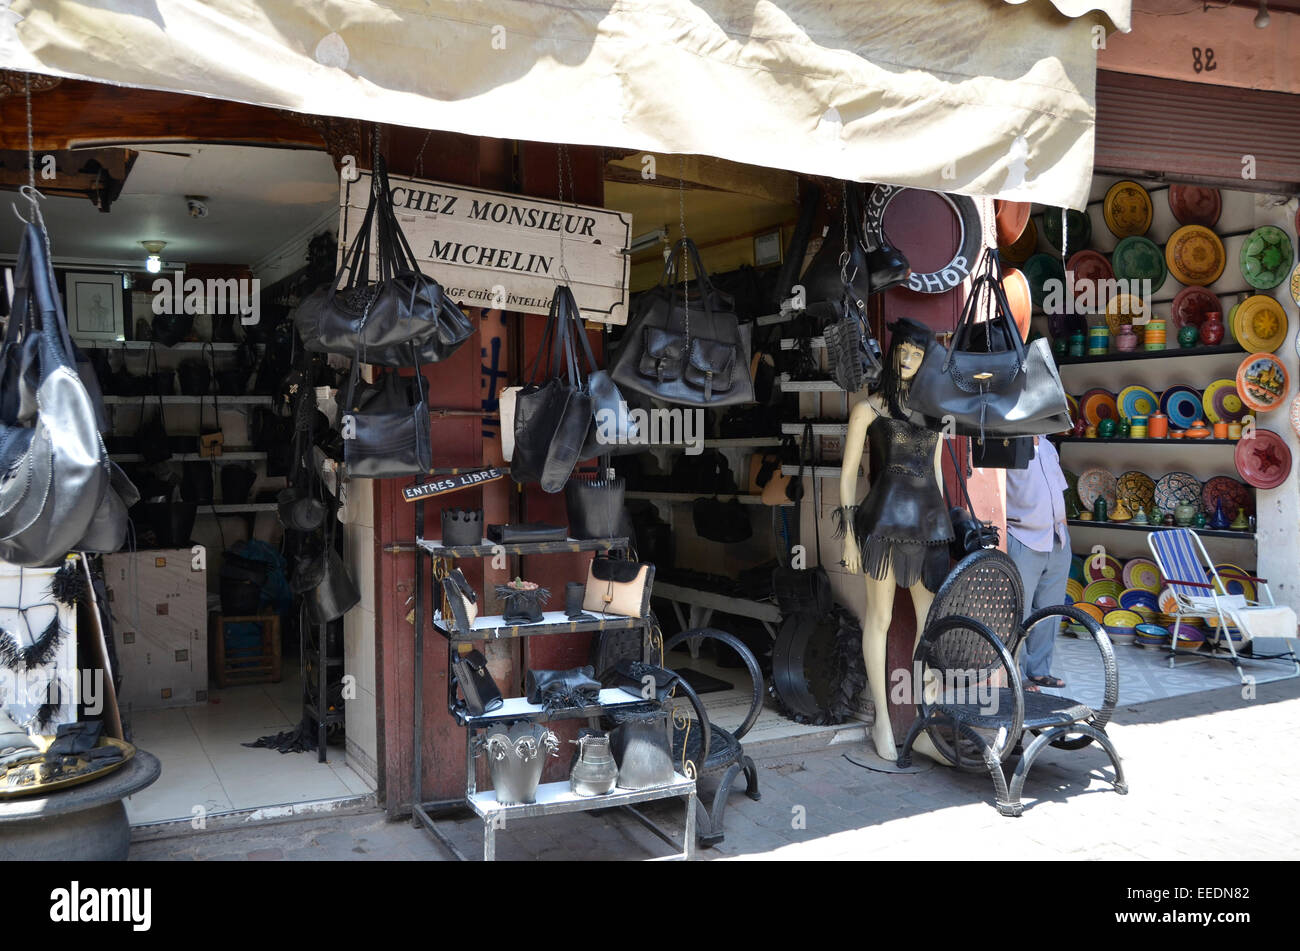 Shop in the Marrakech Marrakesh market souk selling goods of recycled rubber tires Stock Photo